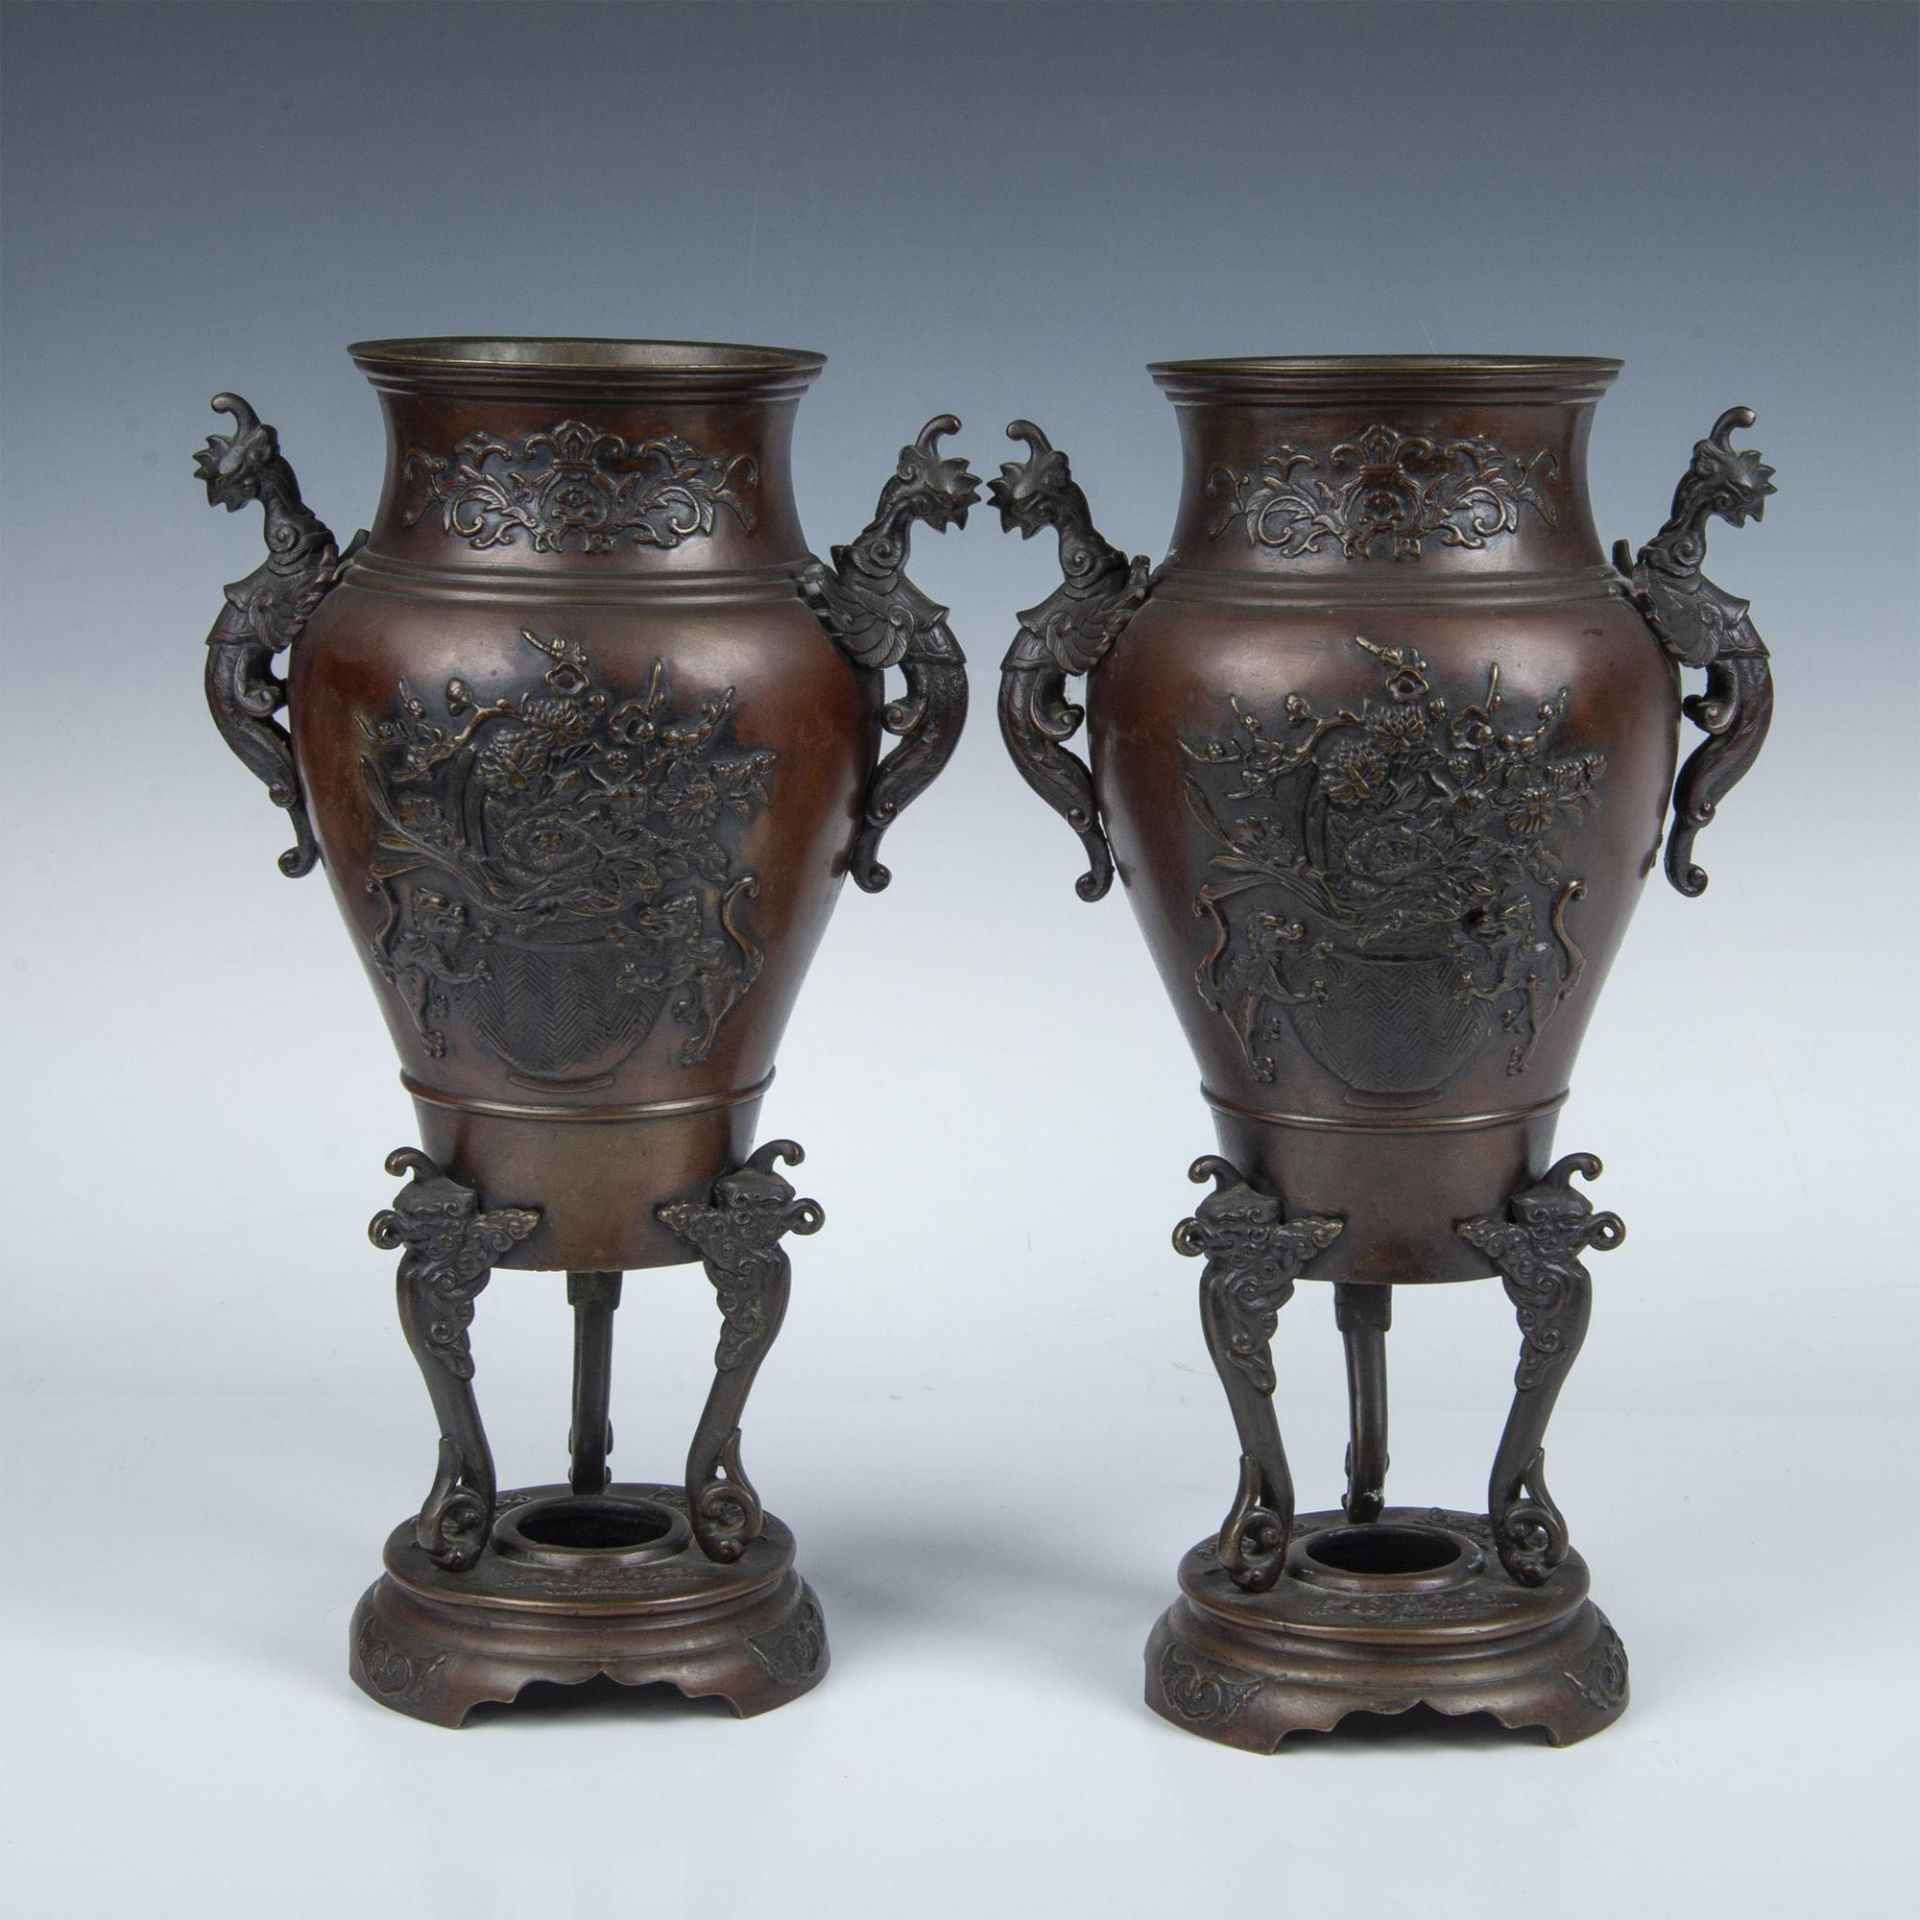 Pair of Antique Japanese Bronze Urns with Griffins Designs - Image 6 of 7